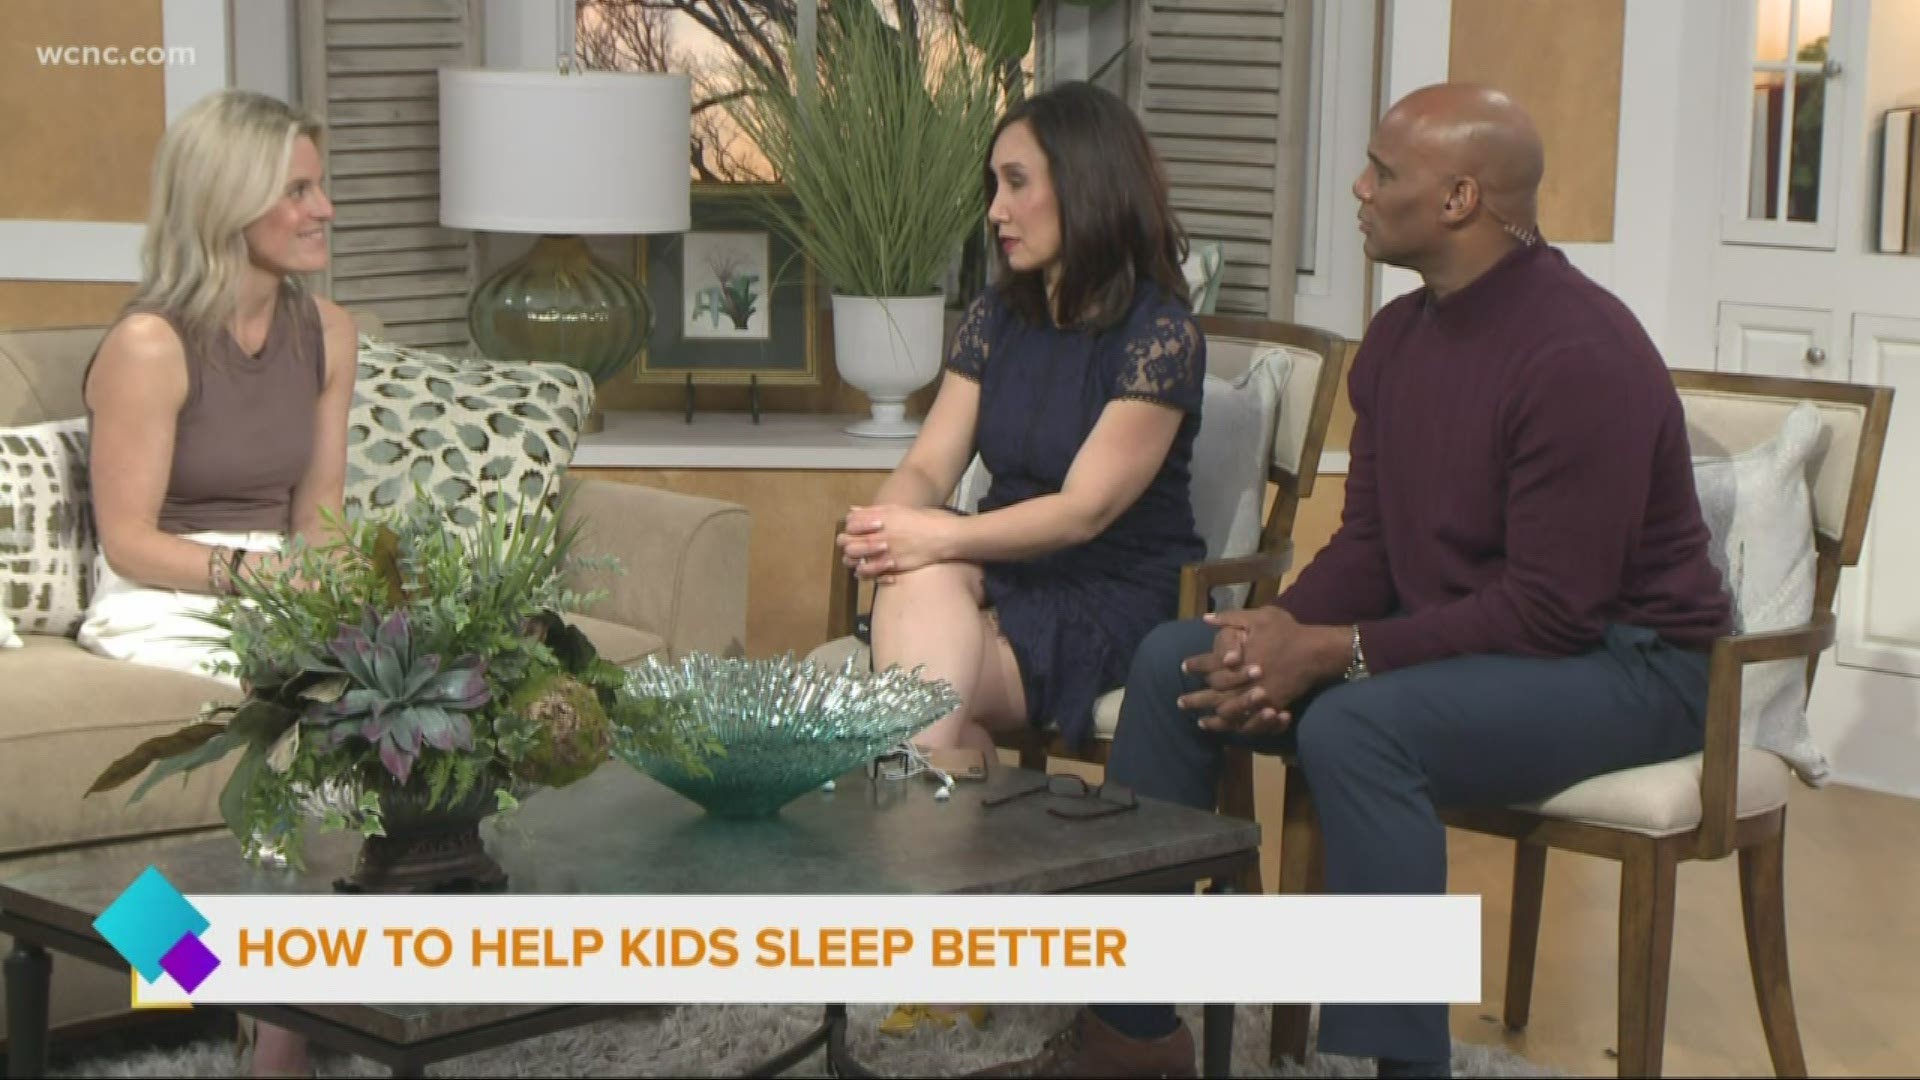 Sleep expert Morgan Griffith shares how parents can help their kids get the right amount of sleep.